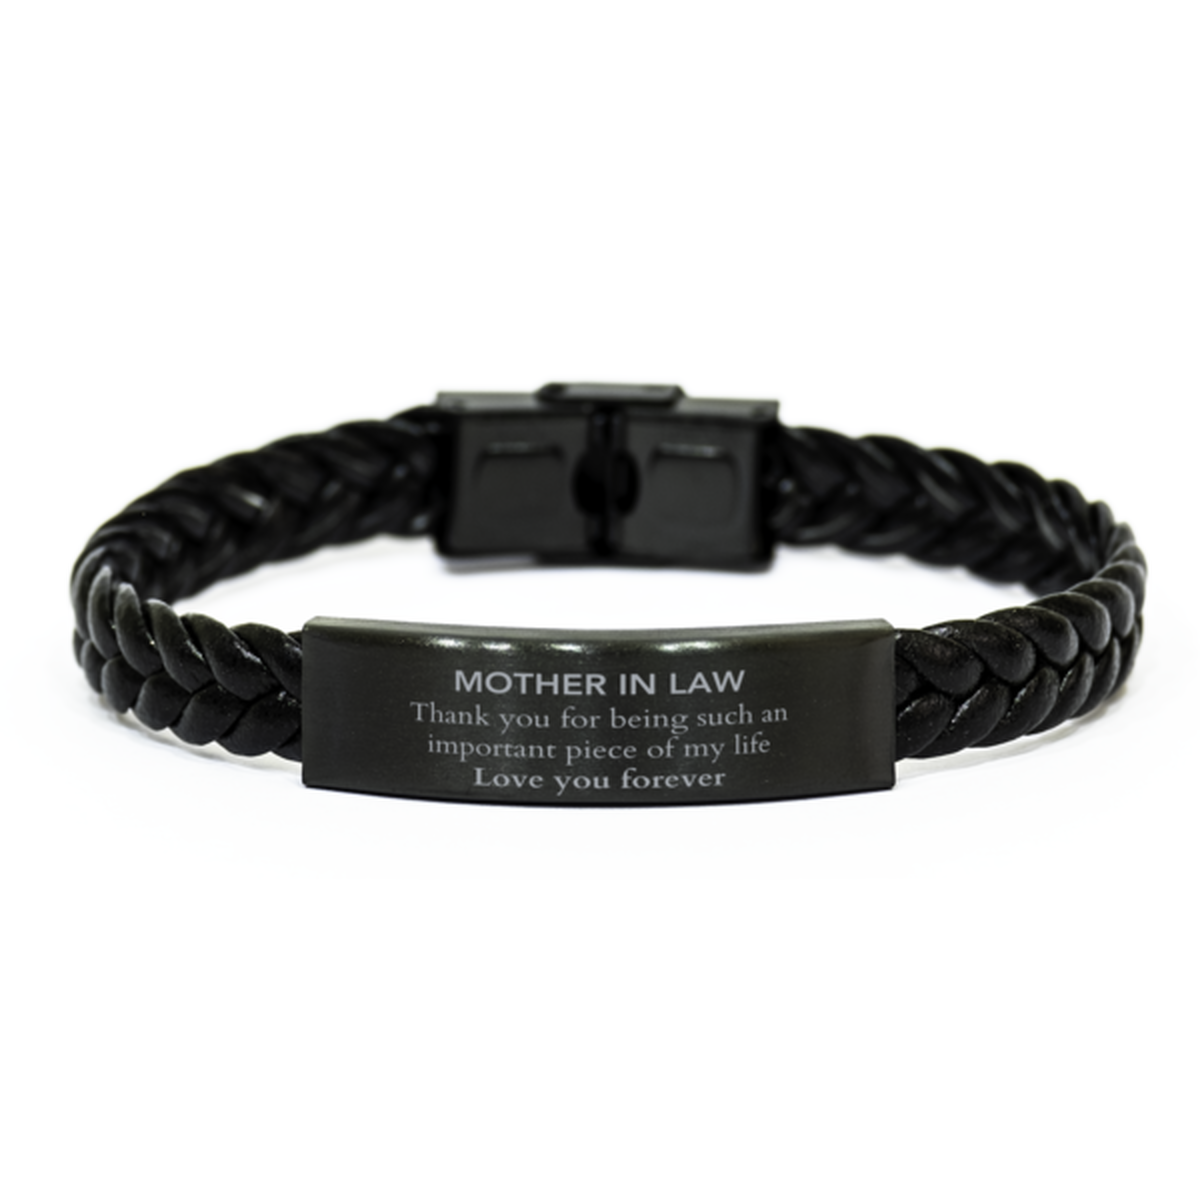 Appropriate Mother In Law Braided Leather Bracelet Epic Birthday Gifts for Mother In Law Thank you for being such an important piece of my life Mother In Law Christmas Mothers Fathers Day